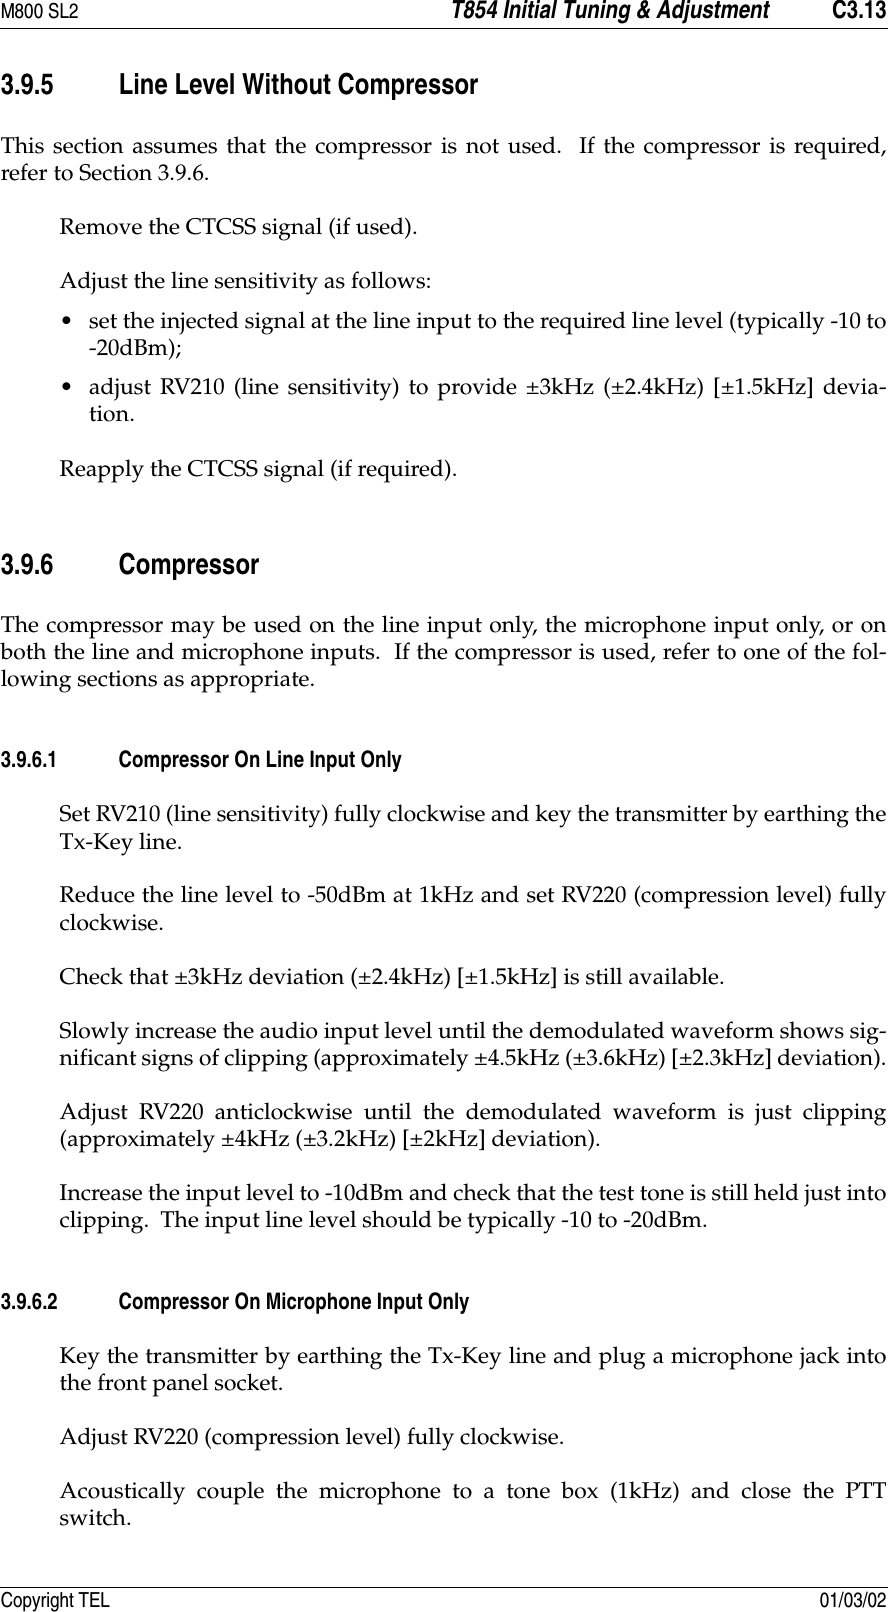 M800 SL2 T854 Initial Tuning &amp; Adjustment C3.13Copyright TEL 01/03/023.9.5 Line Level Without CompressorThis section assumes that the compressor is not used.  If the compressor is required,refer to Section 3.9.6.Remove the CTCSS signal (if used).Adjust the line sensitivity as follows: •set the injected signal at the line input to the required line level (typically -10 to-20dBm);•adjust RV210 (line sensitivity) to provide ±3kHz (±2.4kHz) [±1.5kHz] devia-tion.Reapply the CTCSS signal (if required).3.9.6 CompressorThe compressor may be used on the line input only, the microphone input only, or onboth the line and microphone inputs.  If the compressor is used, refer to one of the fol-lowing sections as appropriate.3.9.6.1 Compressor On Line Input OnlySet RV210 (line sensitivity) fully clockwise and key the transmitter by earthing theTx-Key line.Reduce the line level to -50dBm at 1kHz and set RV220 (compression level) fullyclockwise.Check that ±3kHz deviation (±2.4kHz) [±1.5kHz] is still available.Slowly increase the audio input level until the demodulated waveform shows sig-nificant signs of clipping (approximately ±4.5kHz (±3.6kHz) [±2.3kHz] deviation).Adjust RV220 anticlockwise until the demodulated waveform is just clipping(approximately ±4kHz (±3.2kHz) [±2kHz] deviation).Increase the input level to -10dBm and check that the test tone is still held just intoclipping.  The input line level should be typically -10 to -20dBm.3.9.6.2 Compressor On Microphone Input OnlyKey the transmitter by earthing the Tx-Key line and plug a microphone jack intothe front panel socket.Adjust RV220 (compression level) fully clockwise.Acoustically couple the microphone to a tone box (1kHz) and close the PTTswitch.